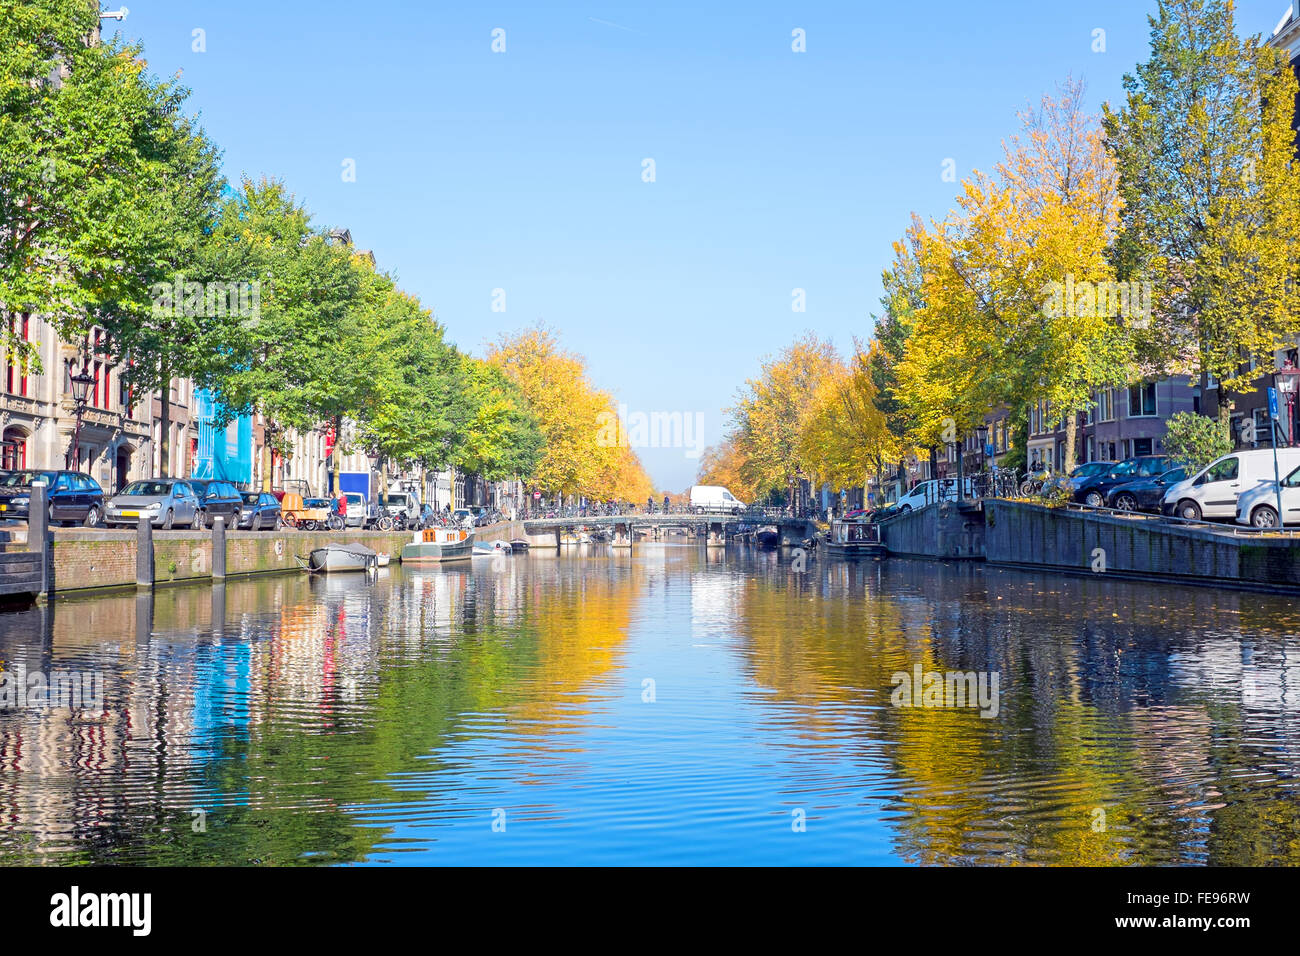 The canals from Amsterdam in the Netherlands in fall Stock Photo